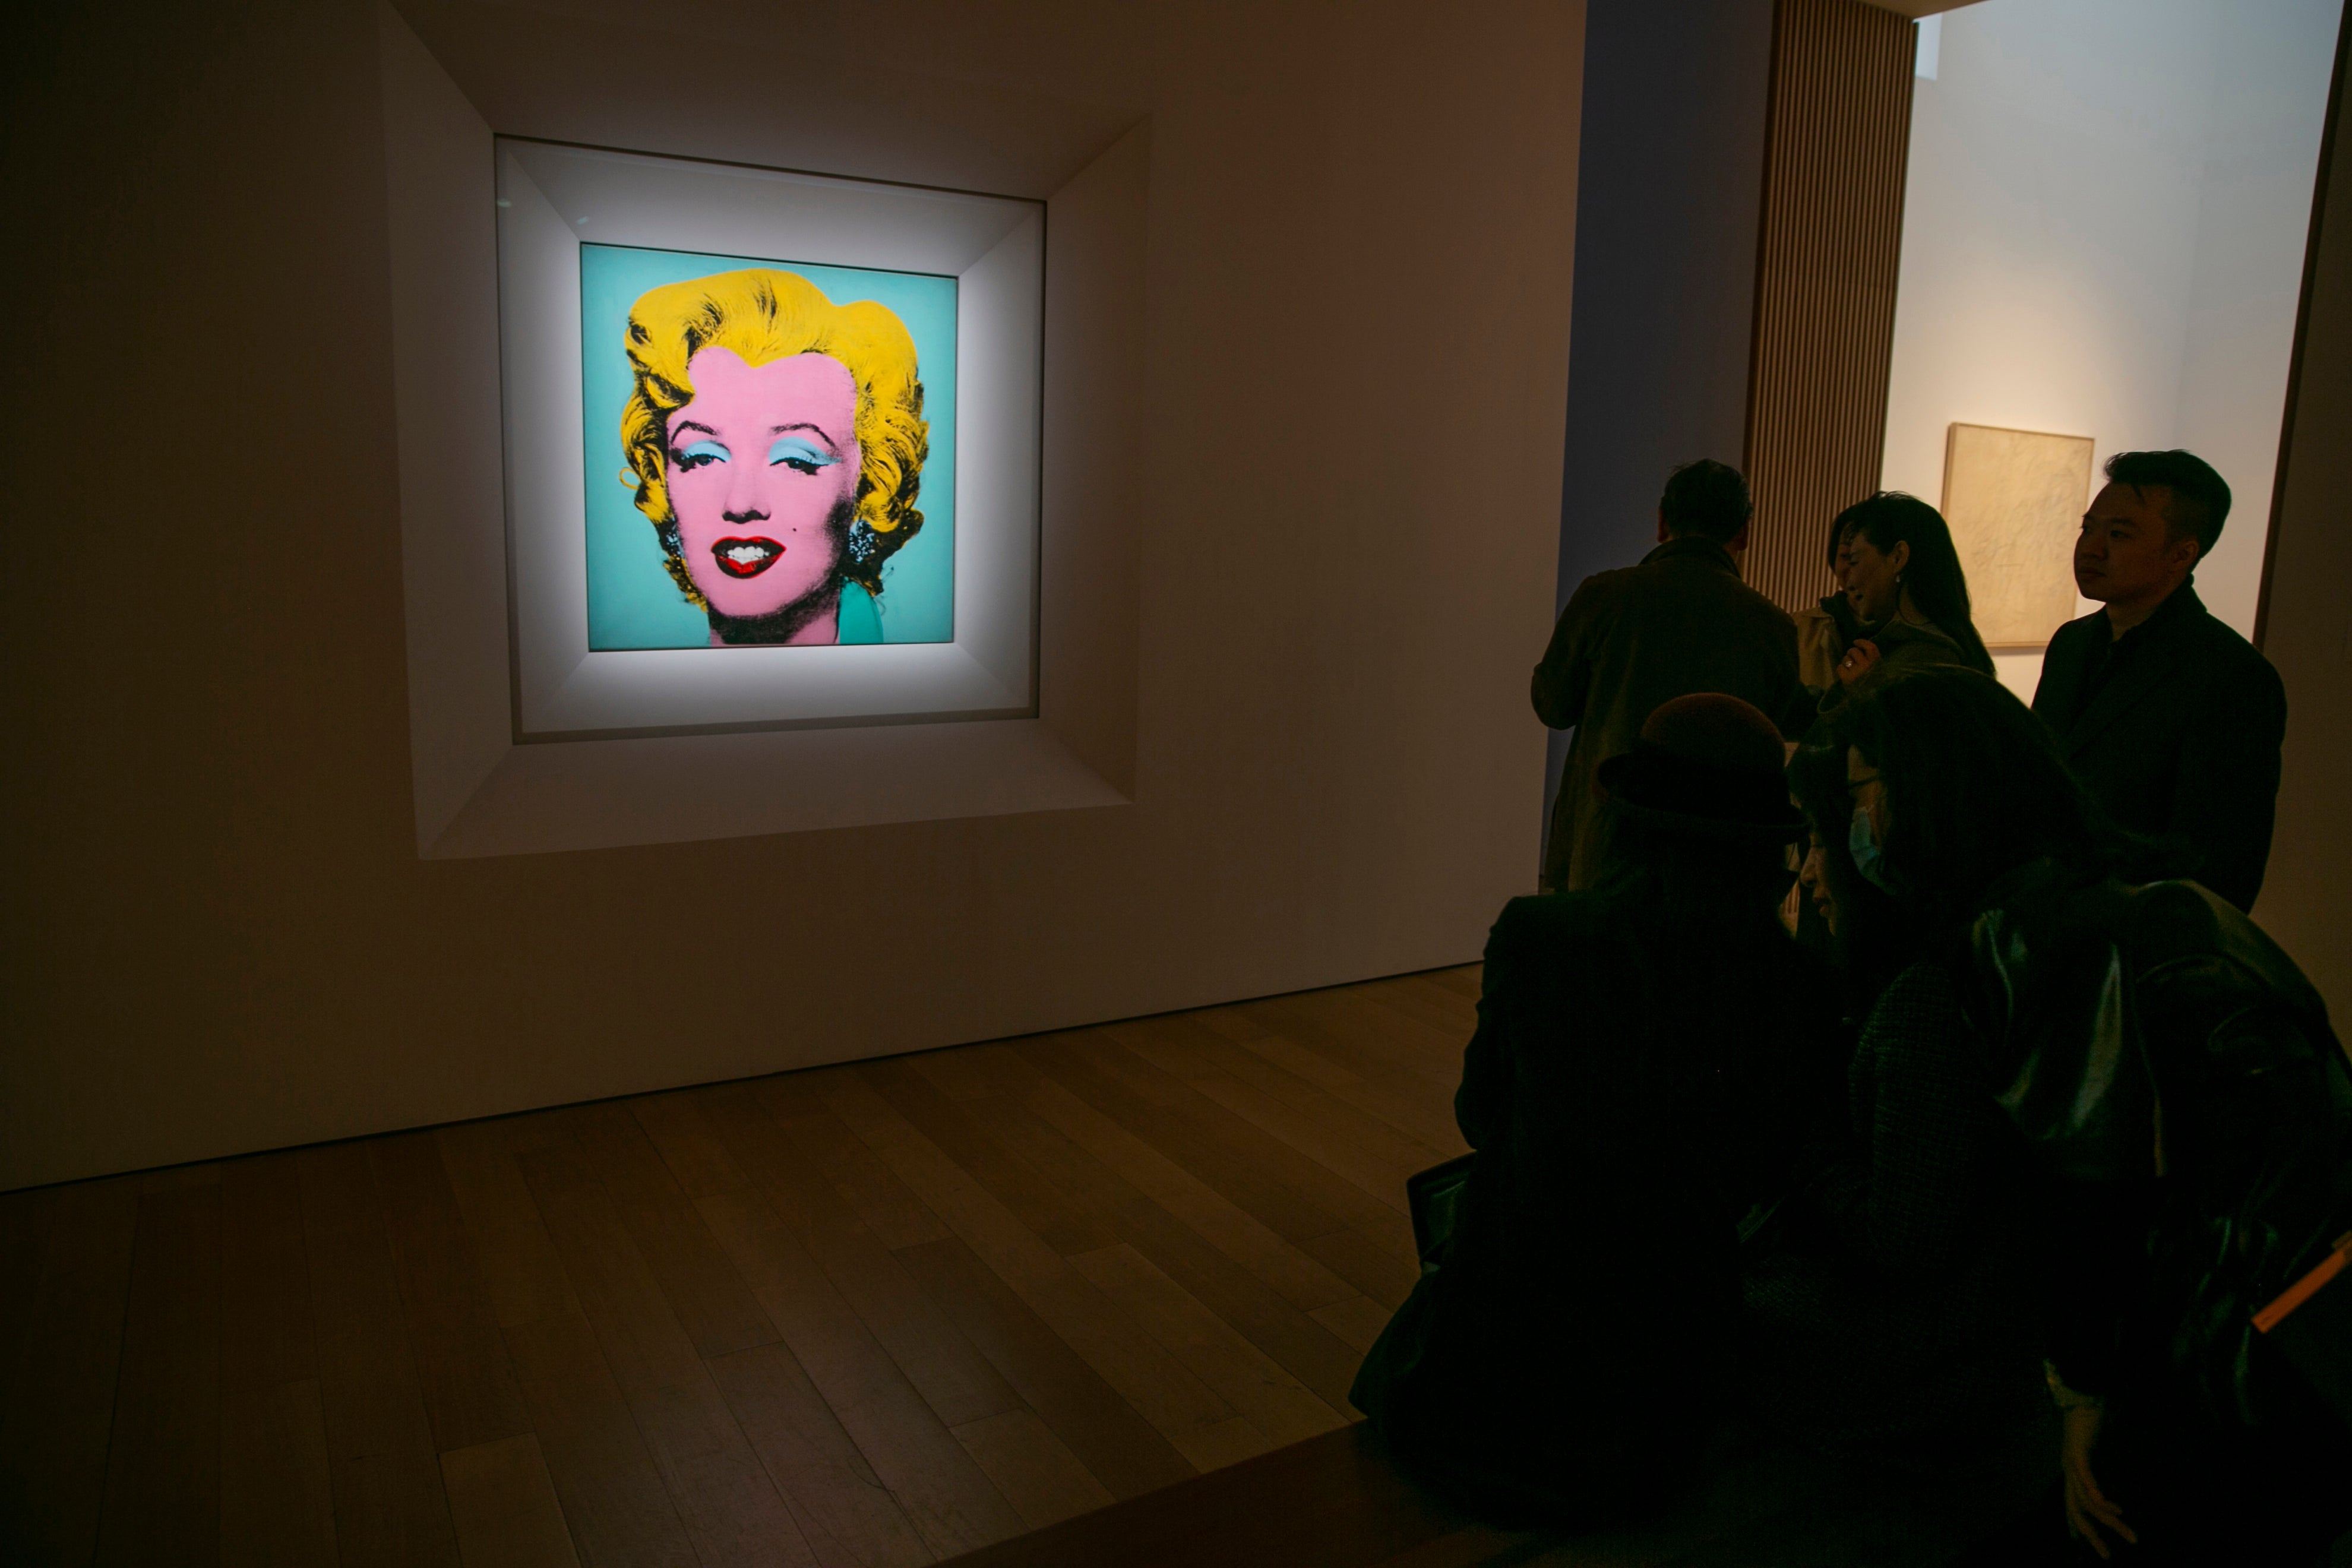 Warhol’s portrait is also the most expensive piece from the 20th century ever to be sold at auction, according to Christie’s auction house (Ted Shaffrey/AP)